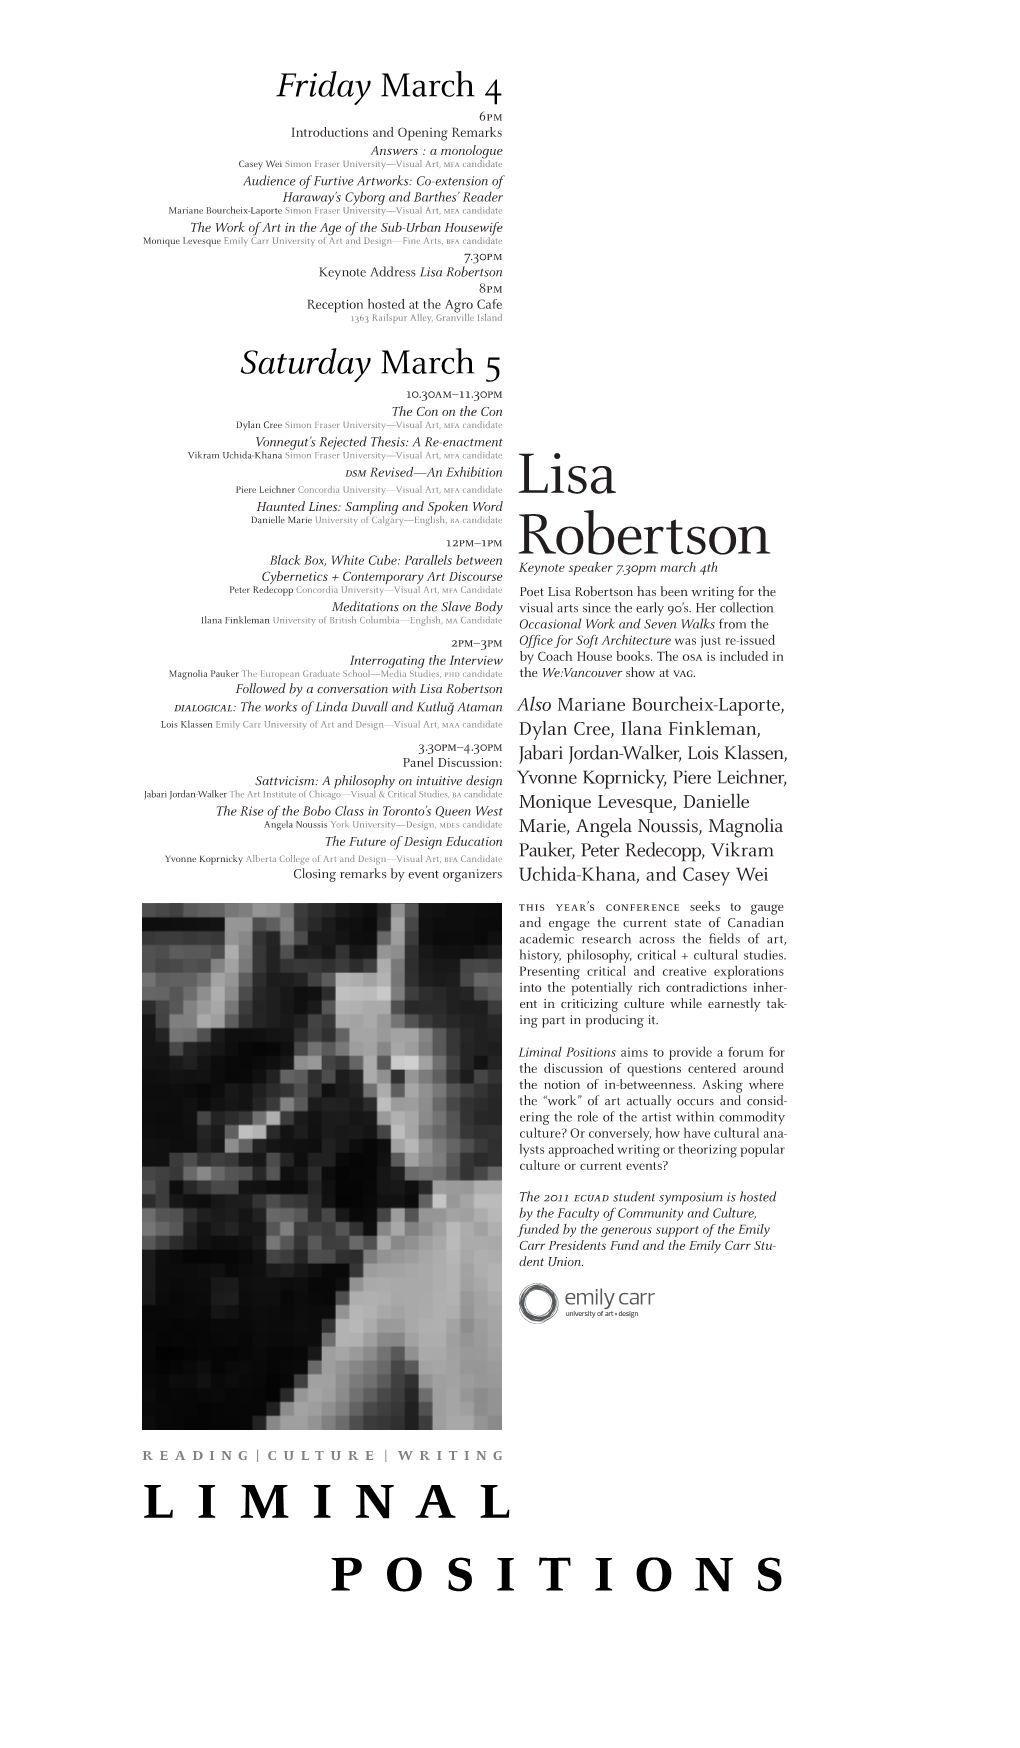 Lisa Robertson 8Pm Reception Hosted at the Agro Cafe 1363 Railspur Alley, Granville Island